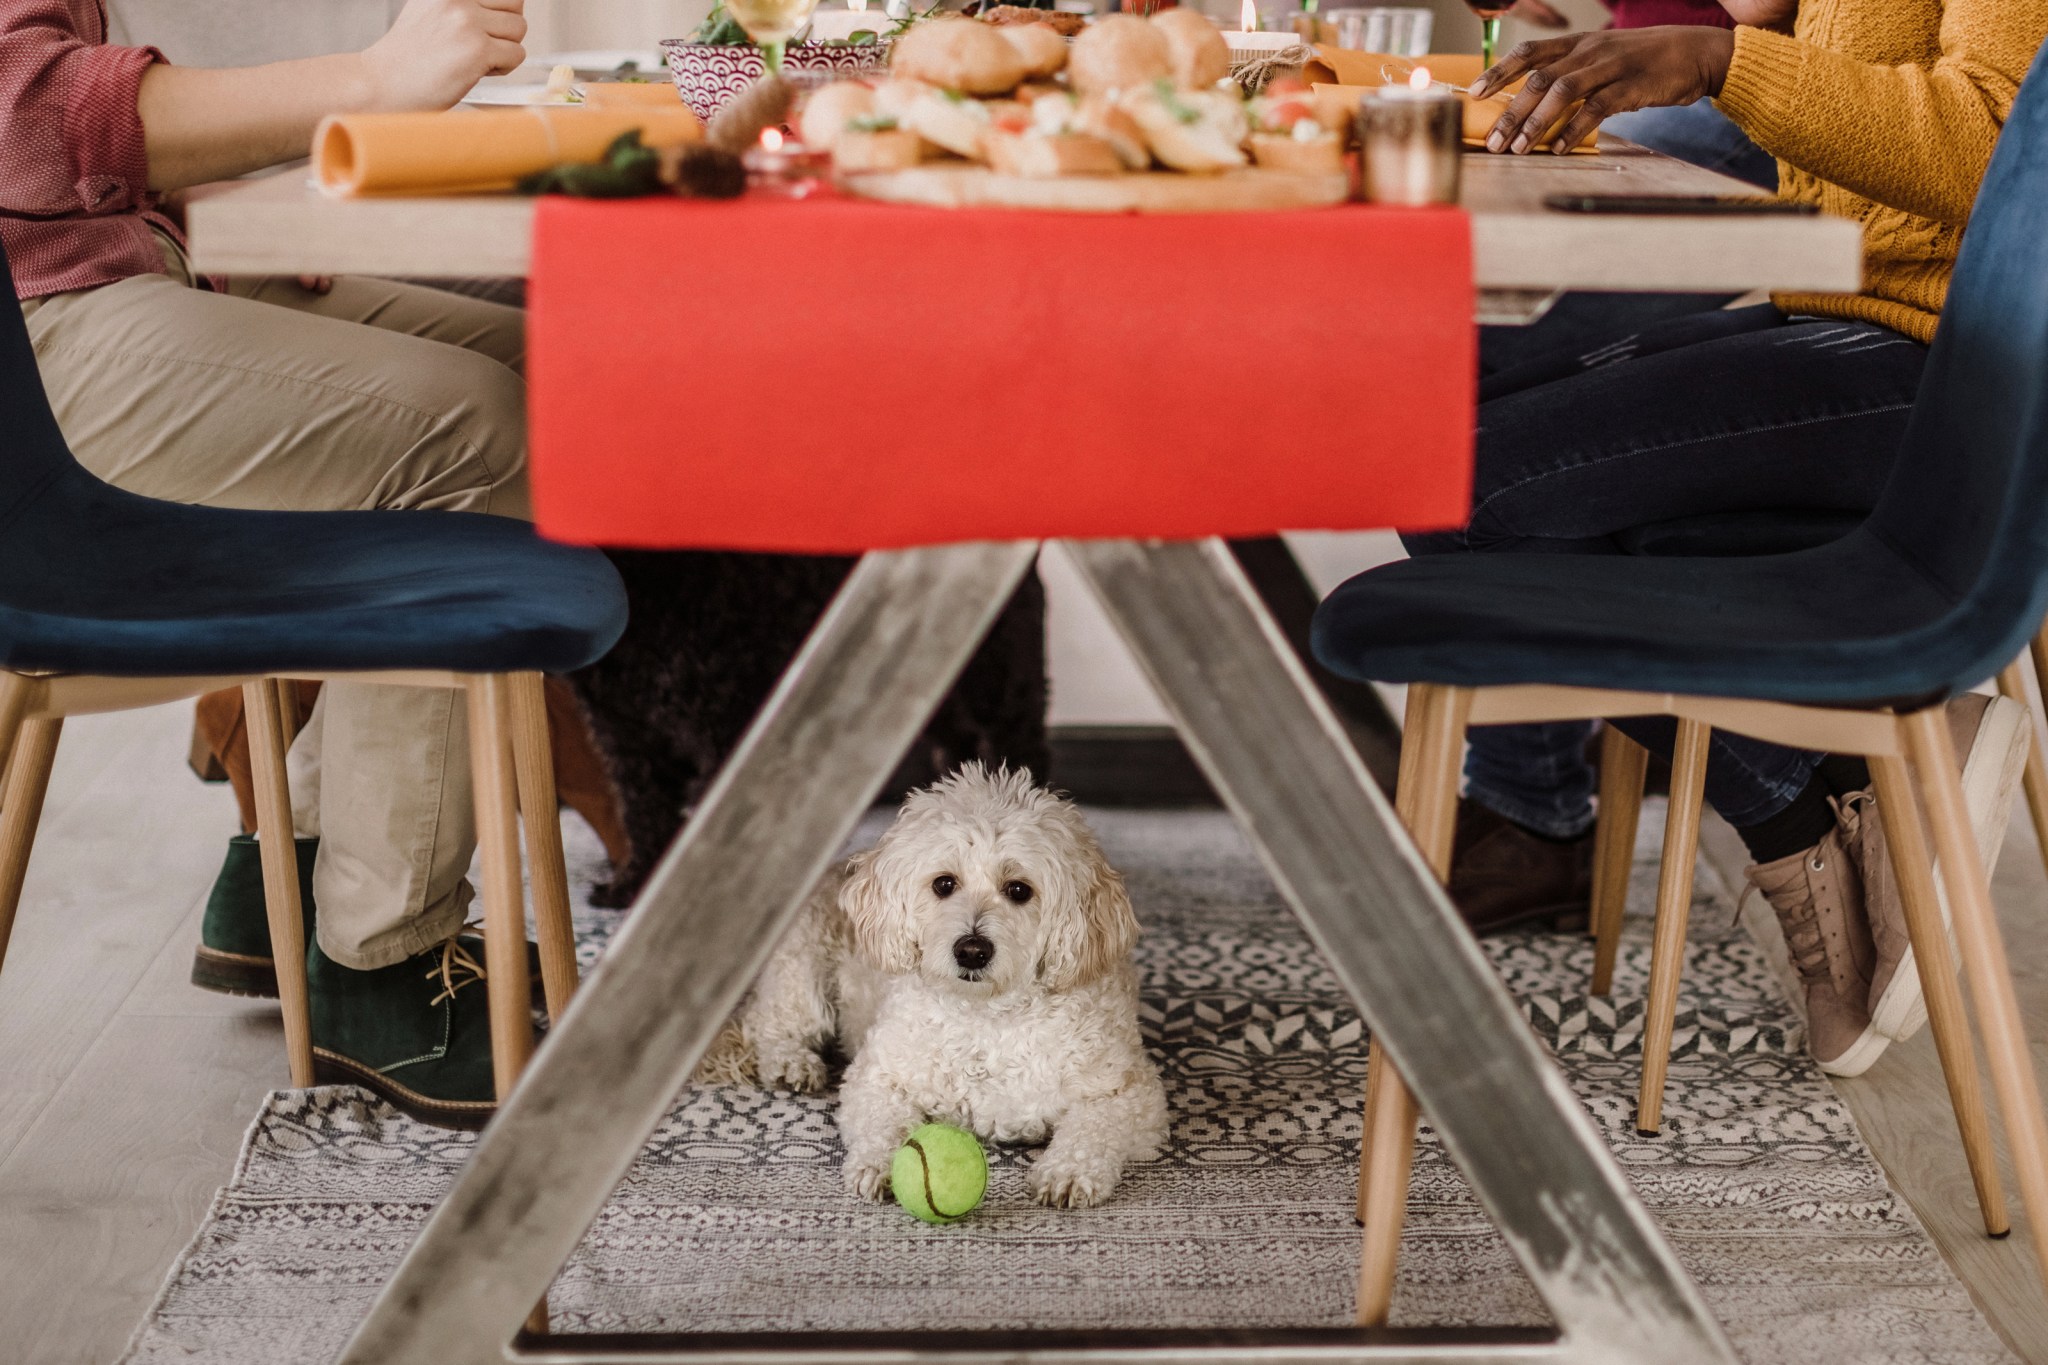 a white poodle with a tennis ball is lying on a decorative rug under a dinner table with a bright red runner while people are gathered around for a large feast